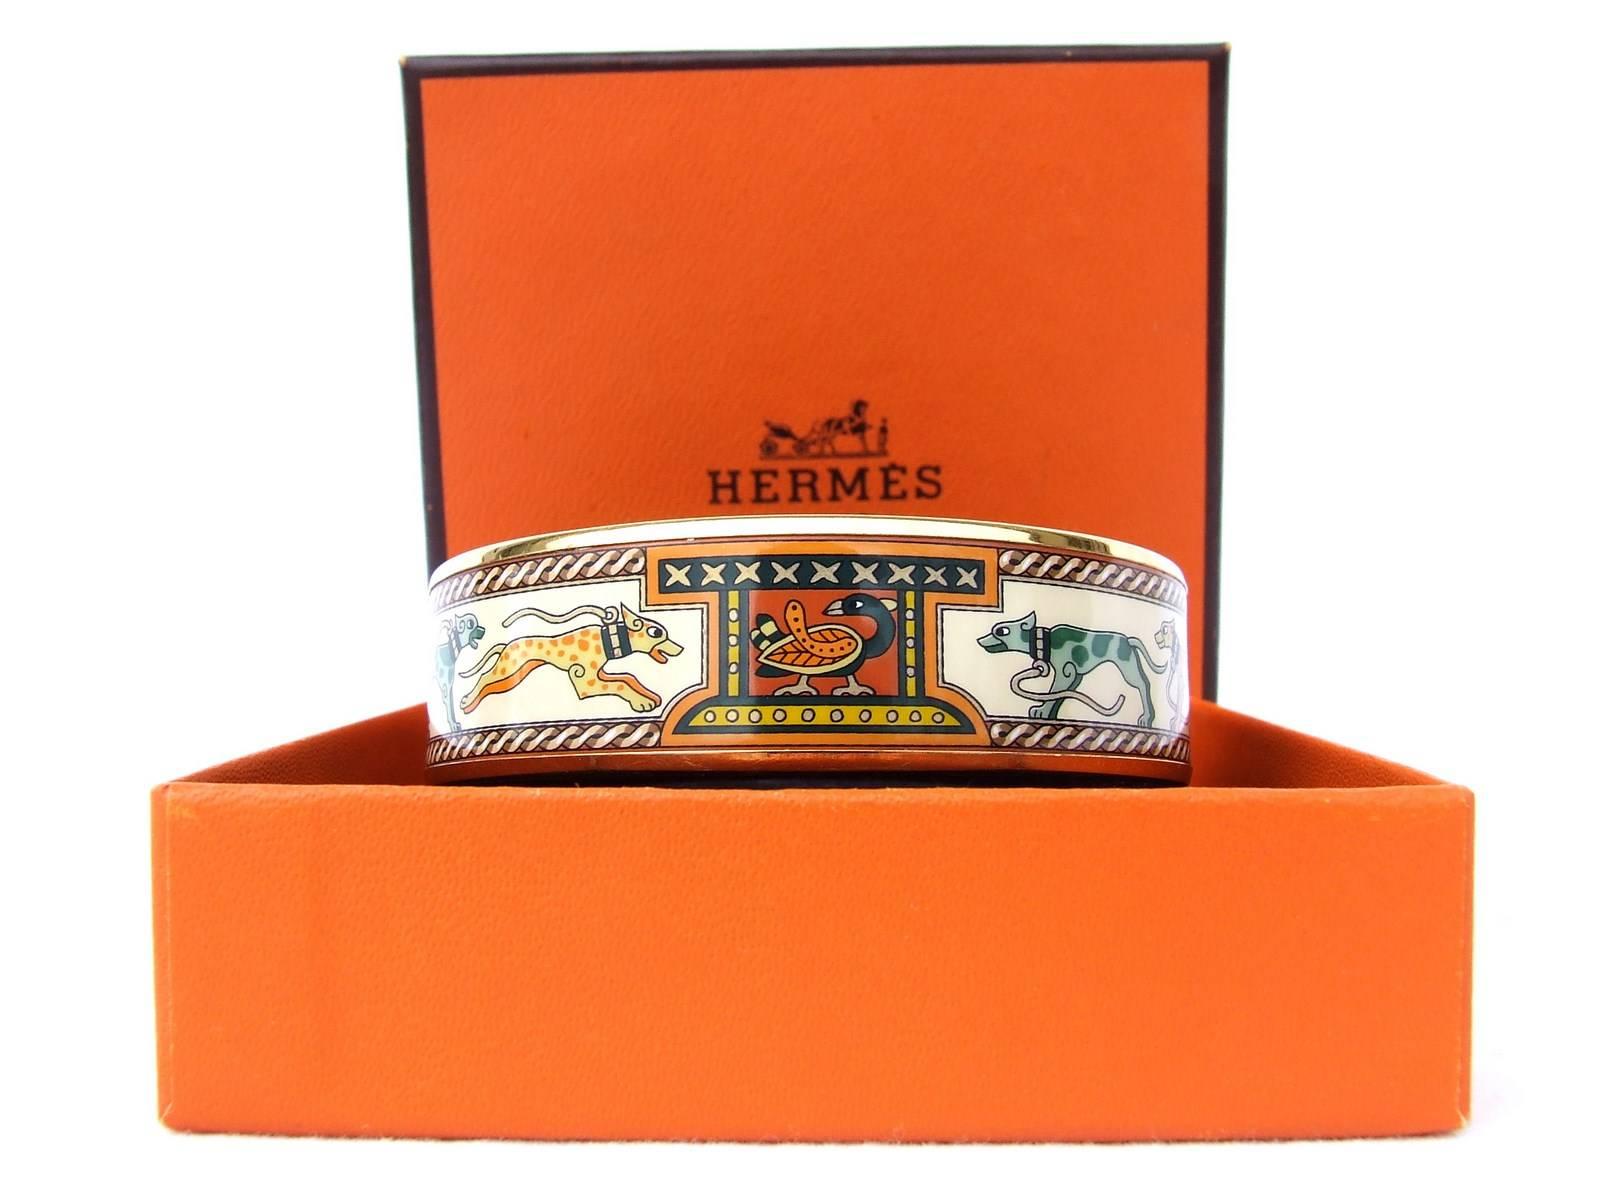 Beautiful Authentic Hermes Bracelet

Pattern: Levriers (Greyhounds dogs)

Made in Austria

Stamp A

Made of Enamel and Gold plated Hardware

Colorways: Light Beige, Green, Yellow, Brick (orange), Gold

"HERMES PARIS" in golden letters